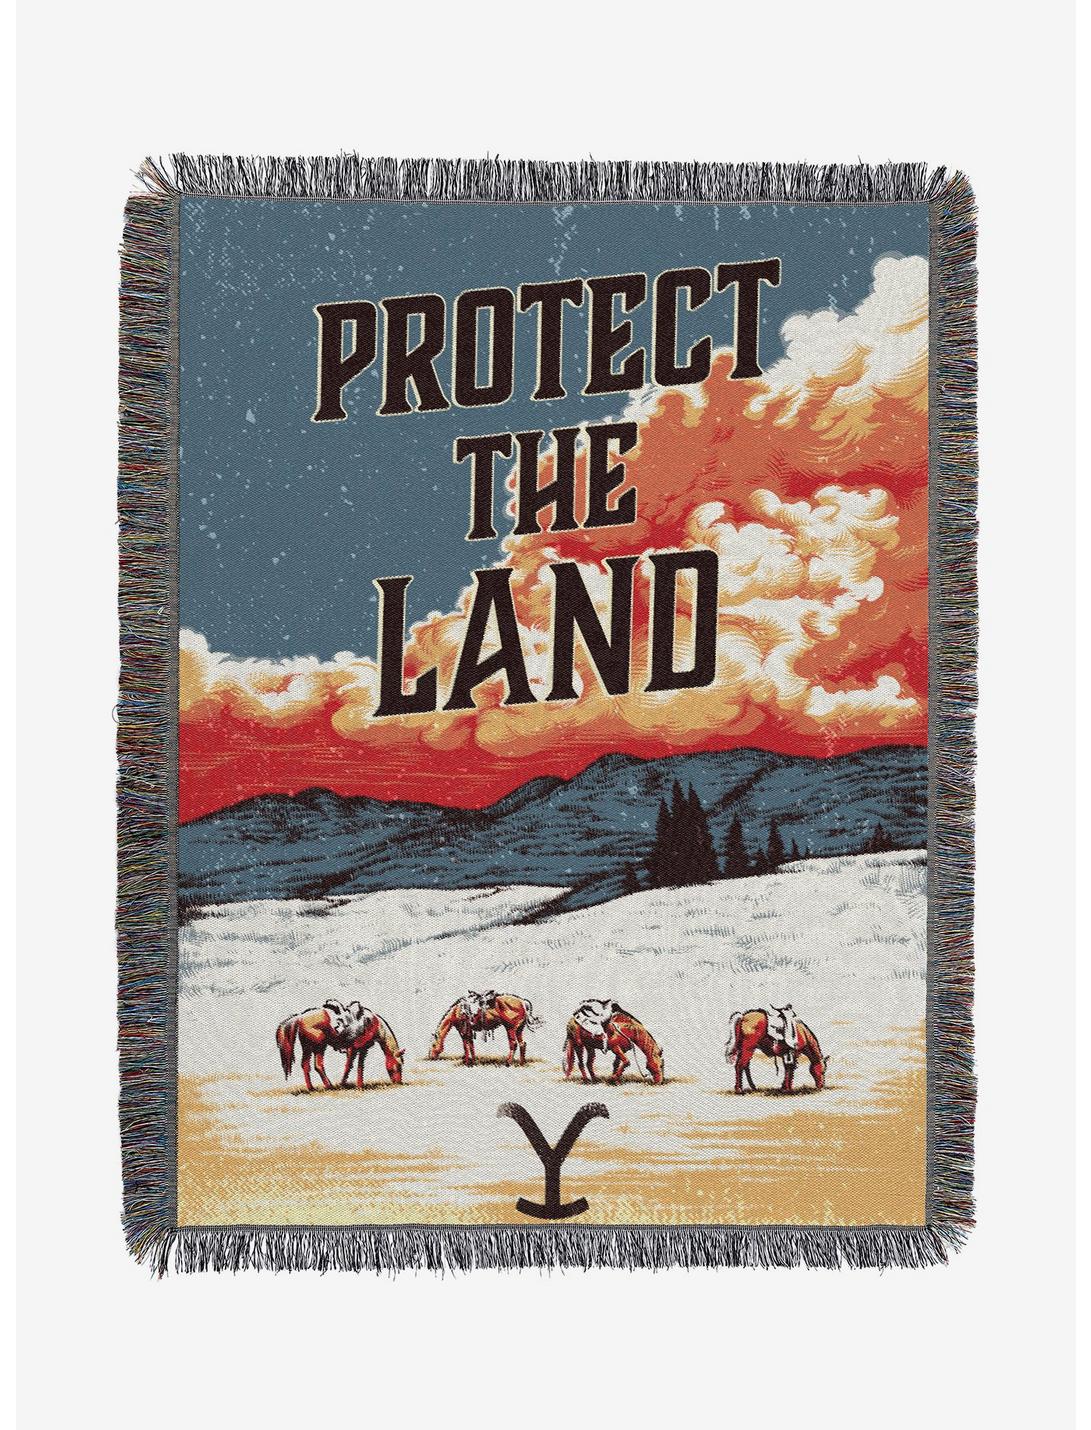 Yellowstone Protect Woven Tapestry Throw Blanket, , hi-res